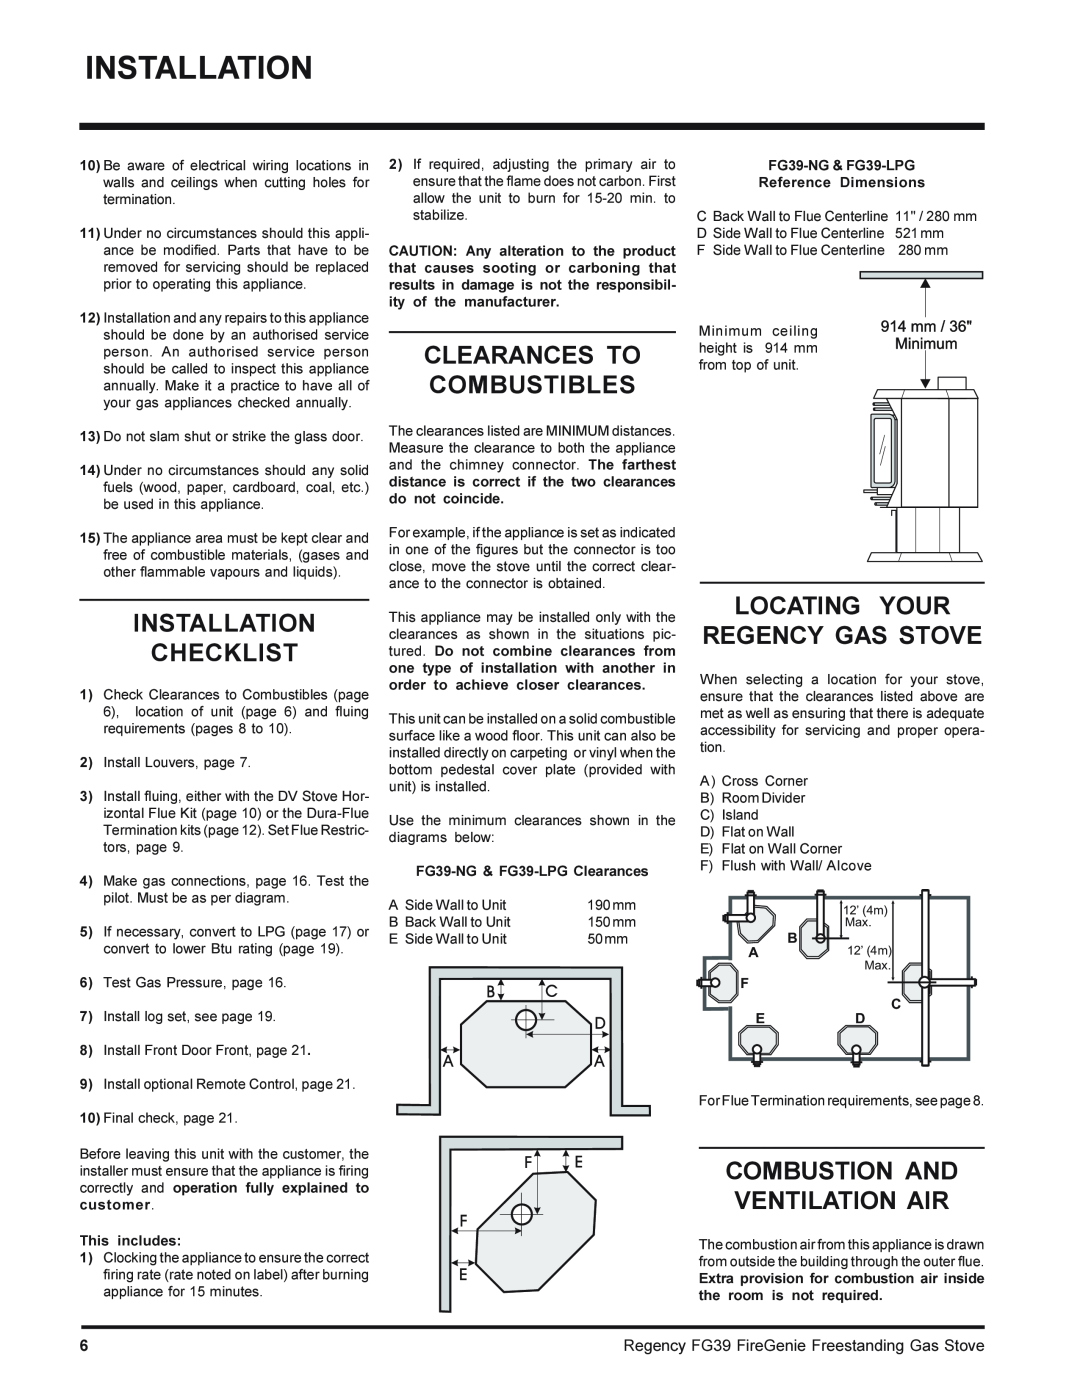 Regency FG39-LPG, FG39-NG Installation Checklist, Clearances To Combustibles, Locating Your Regency Gas Stove 